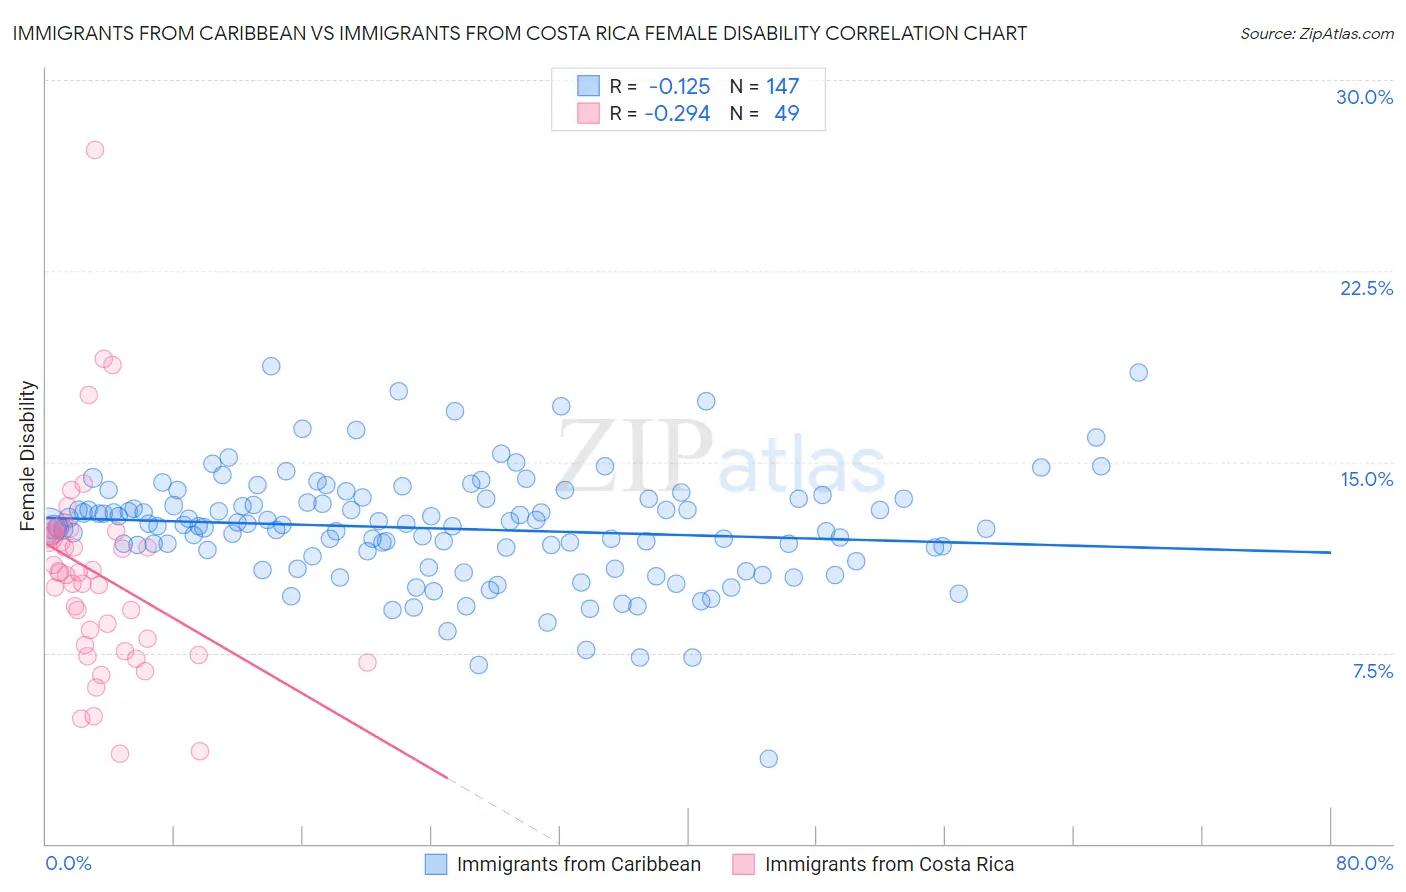 Immigrants from Caribbean vs Immigrants from Costa Rica Female Disability